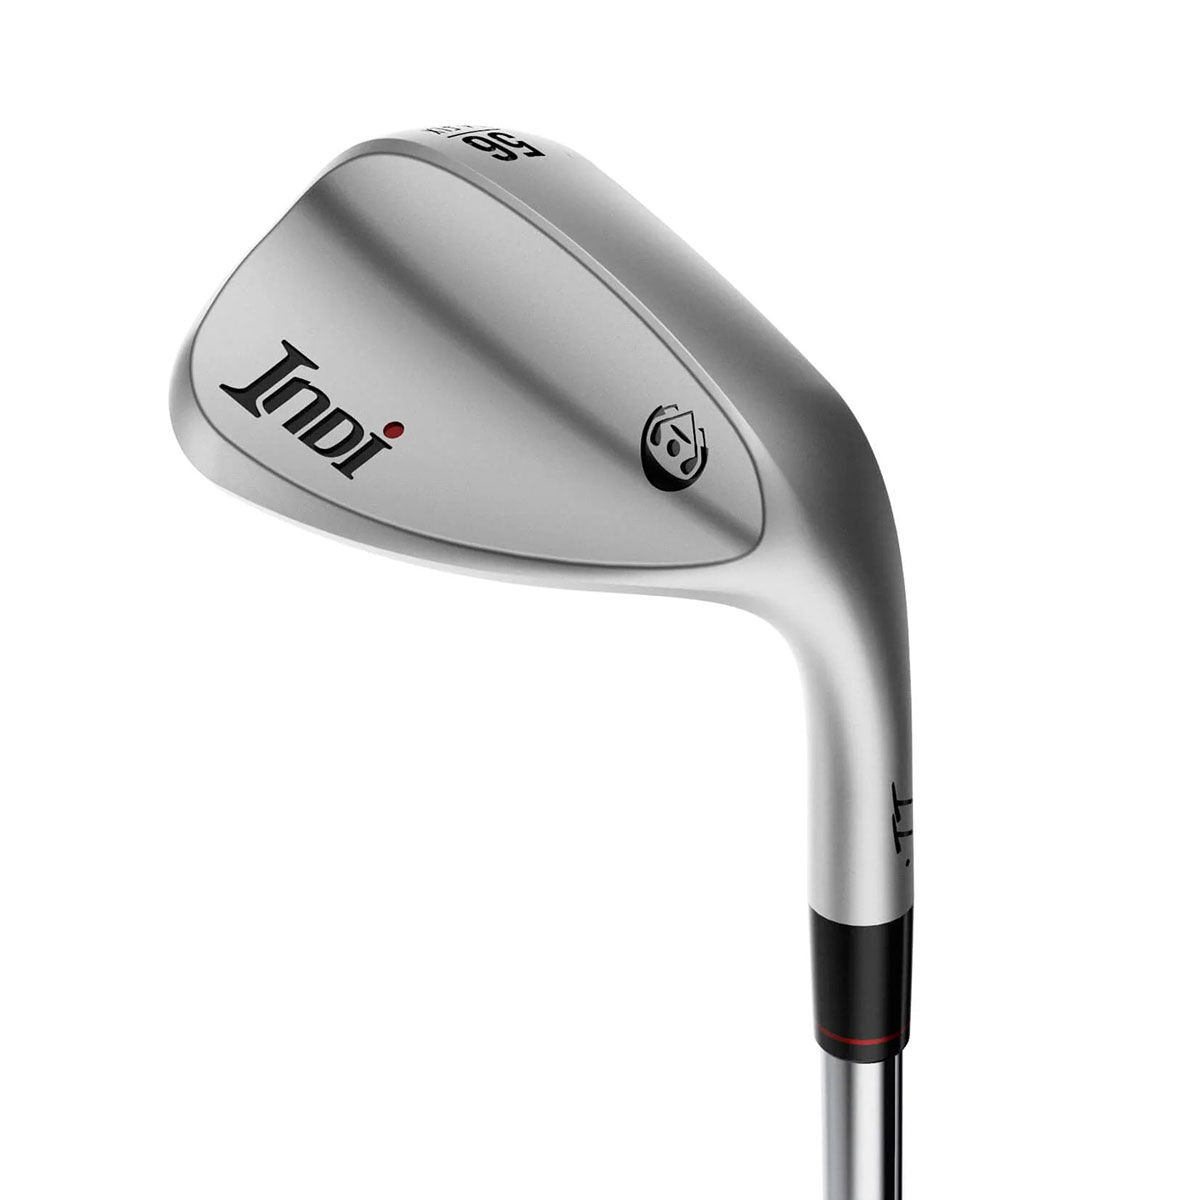 INDI FLX S Grind Steel Golf Wedge, Mens, Right hand, 60 flx grind, Steel | American Golf von Indi Golf